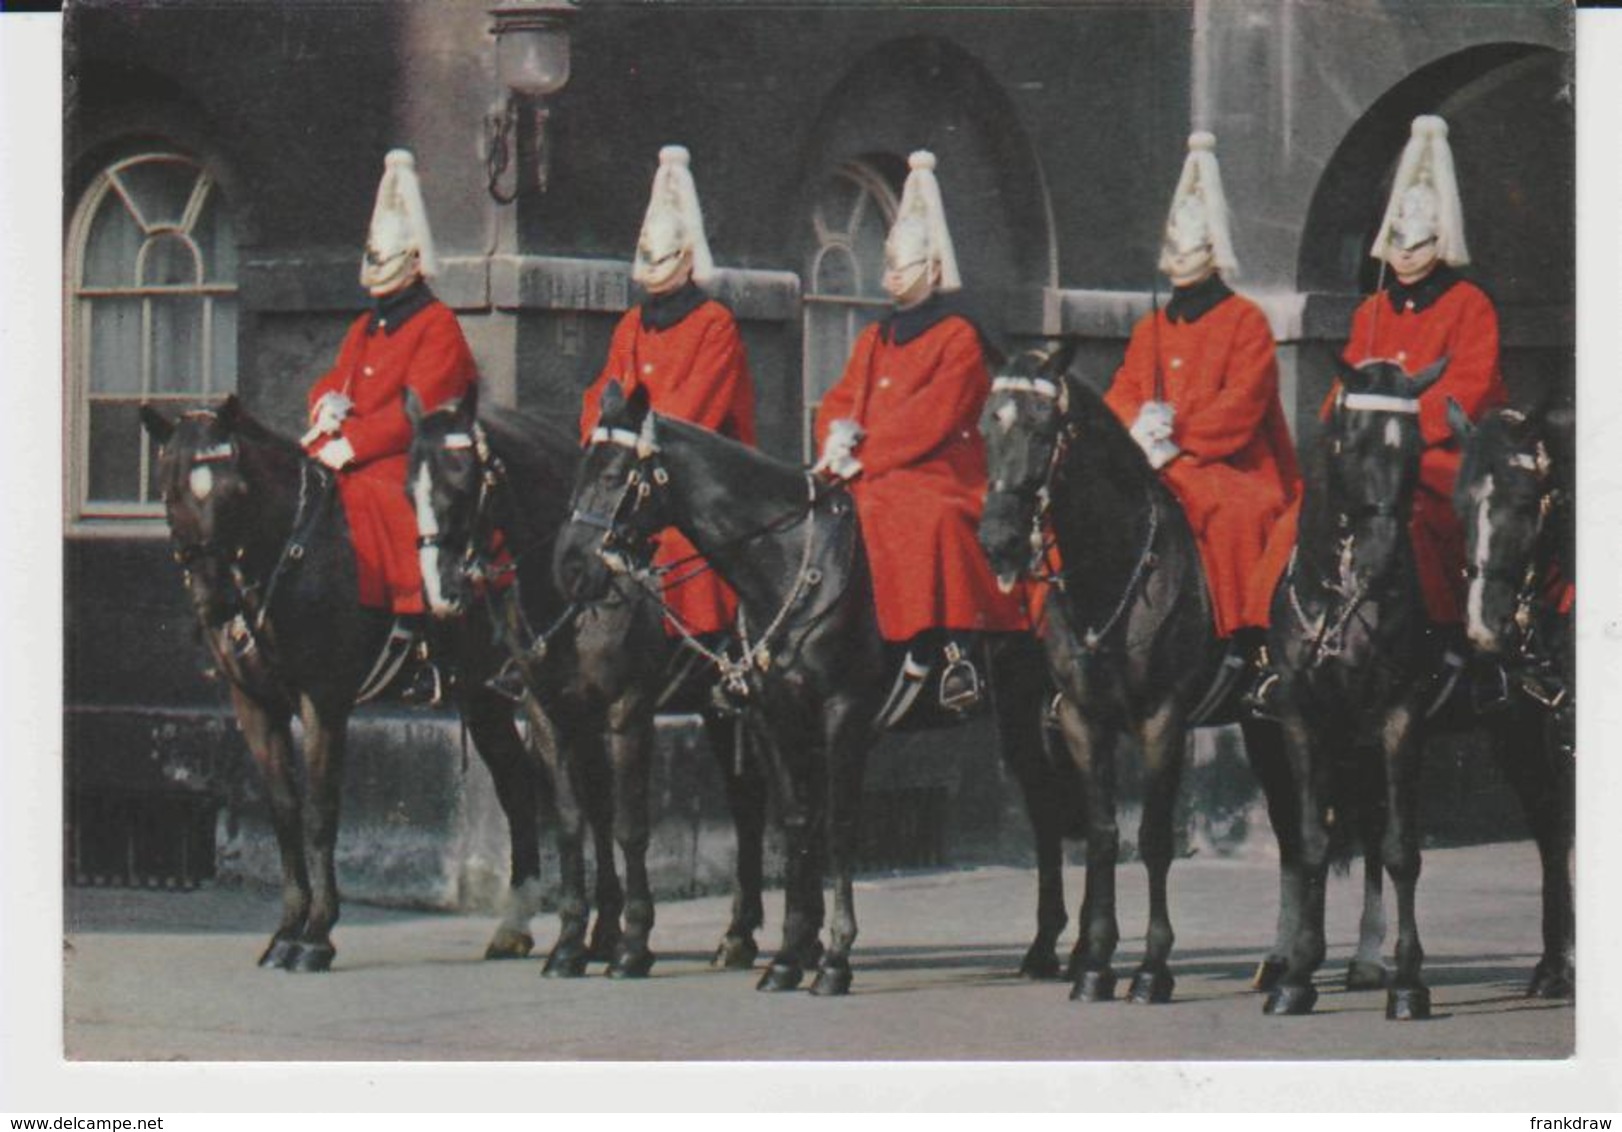 Postcard - Life Guards, Horse Guards, Parade, London,cards No.Lon6306  - Unused Very Good - Unclassified